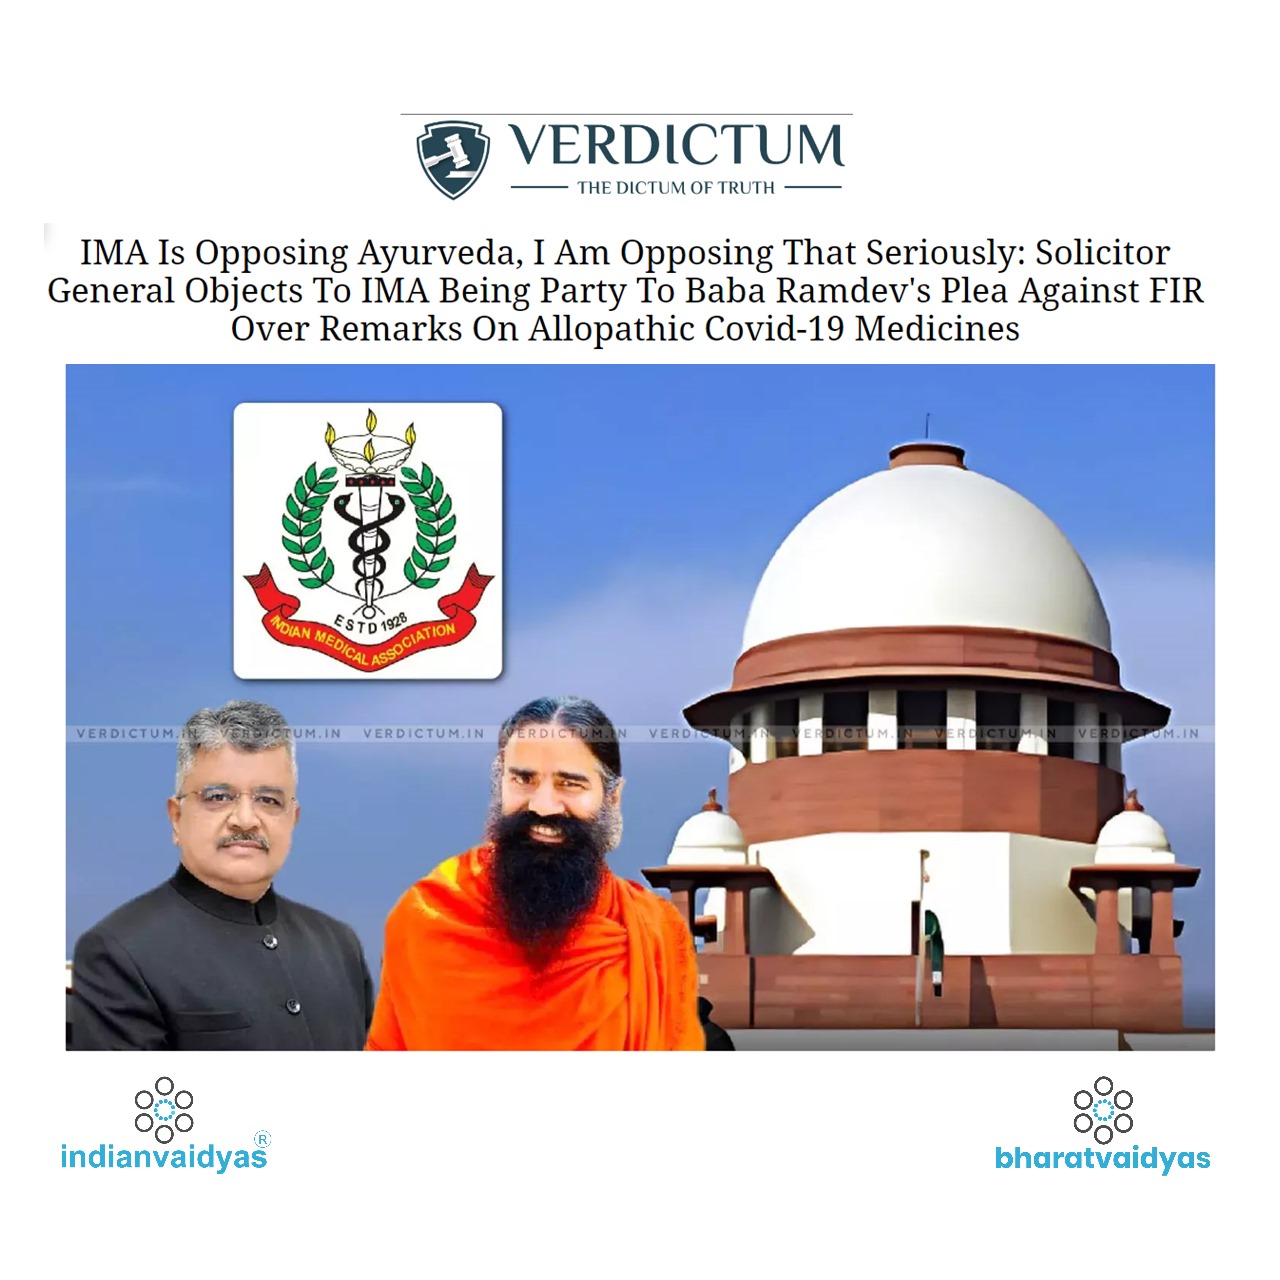 IMA Is Opposing Ayurveda, I Am Opposing That Seriously: Solicitor General Objects To IMA Being Party To Baba Ramdev's Plea Against FIR Over Remarks On Allopathic Covid-19 Medicines